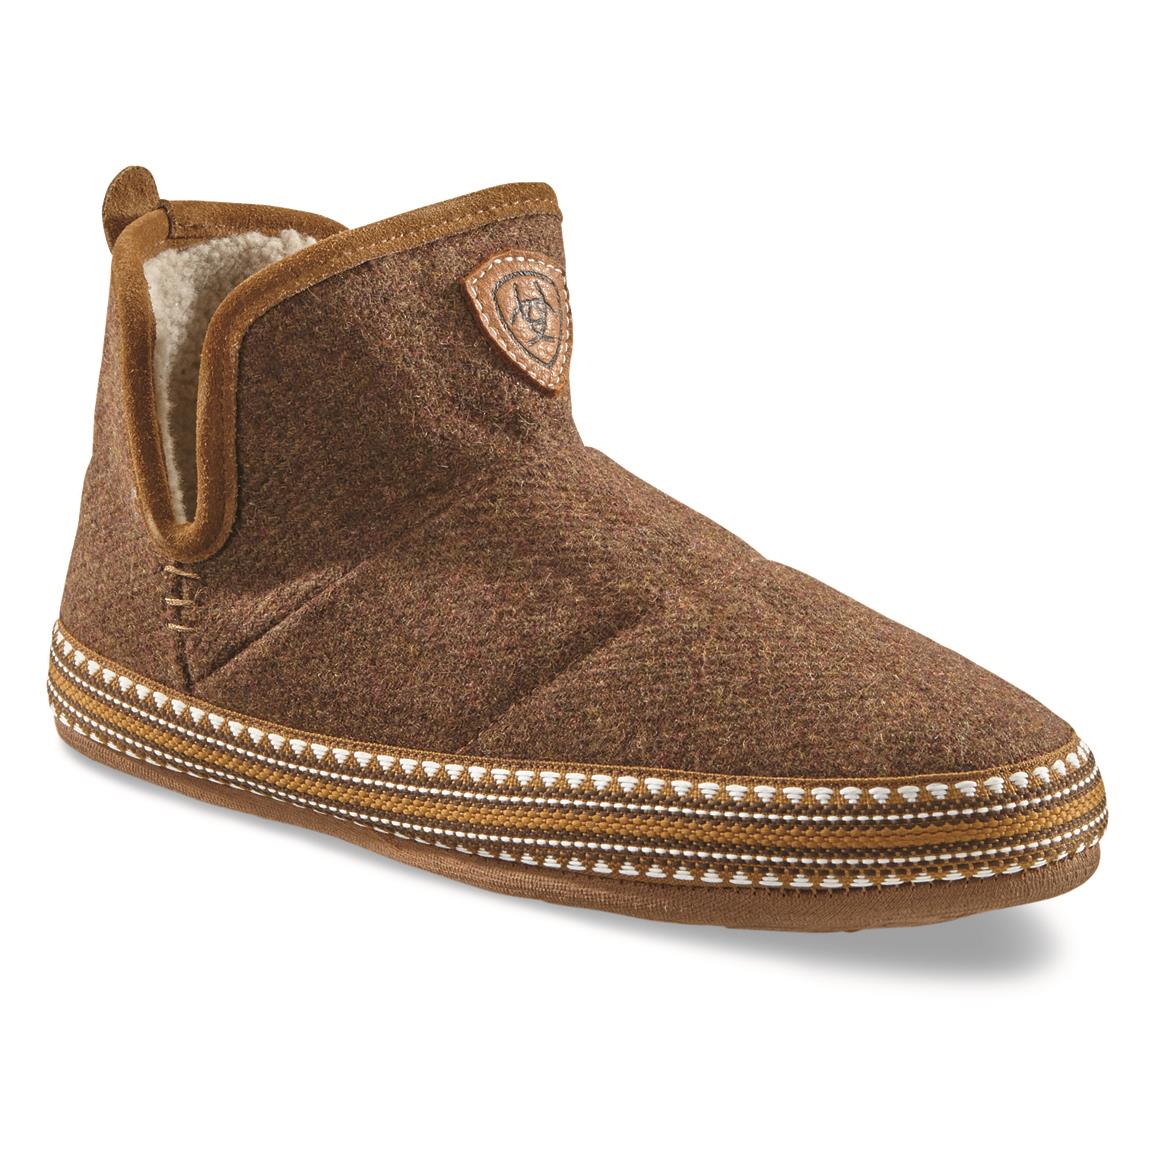 Ariat Women's Bootie Slippers - 739066, Slippers at Sportsman's Guide